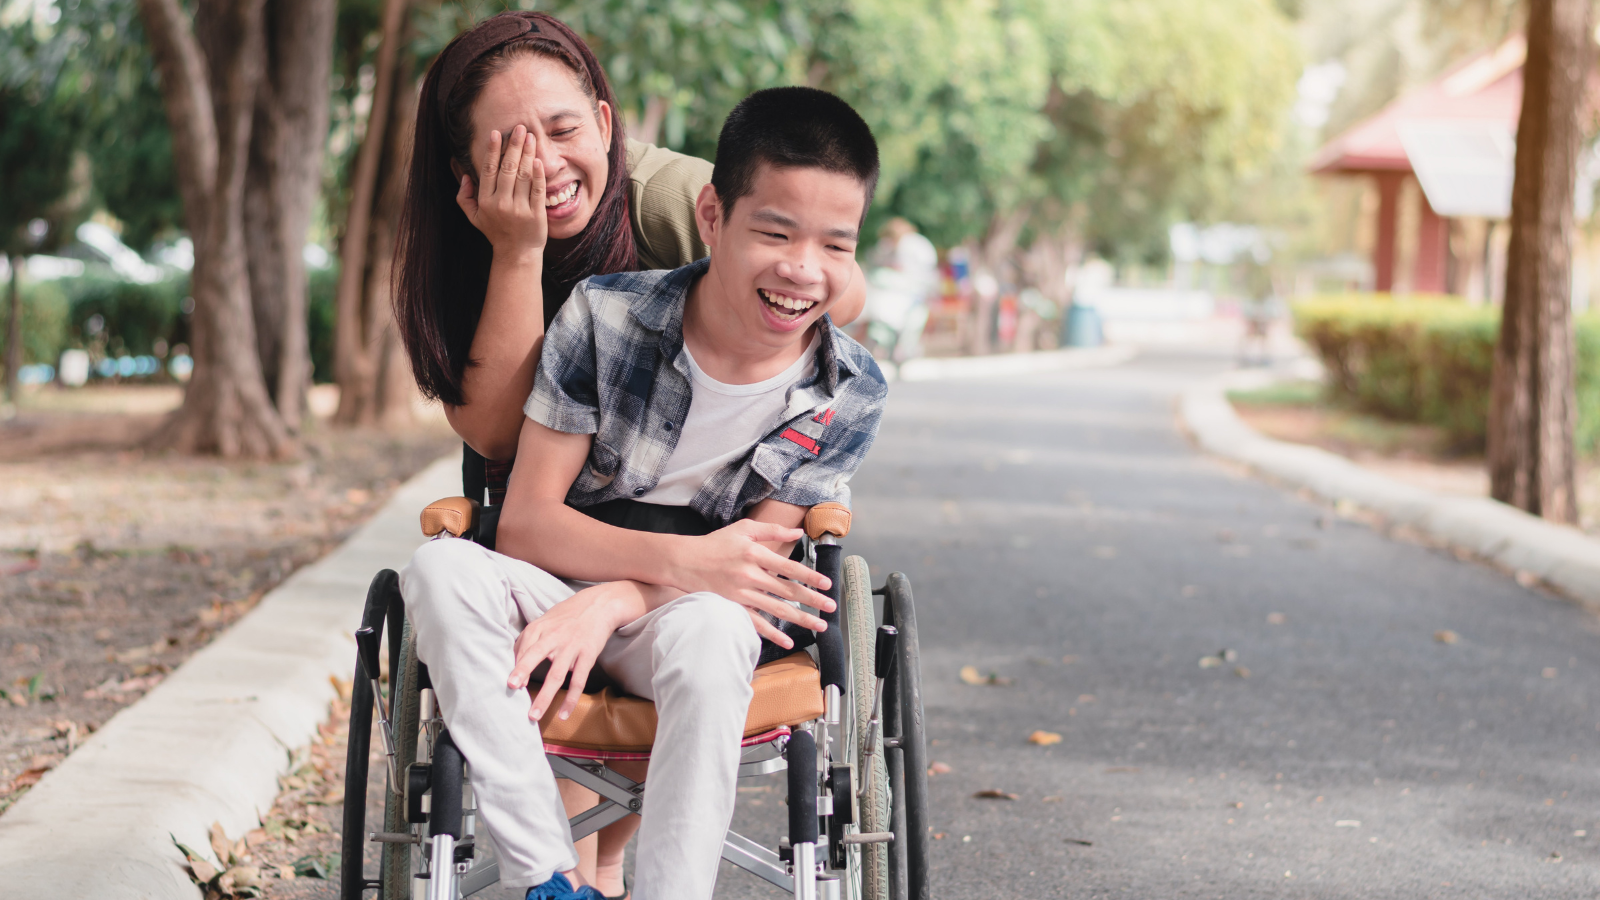 Child in wheelchair with caregiver